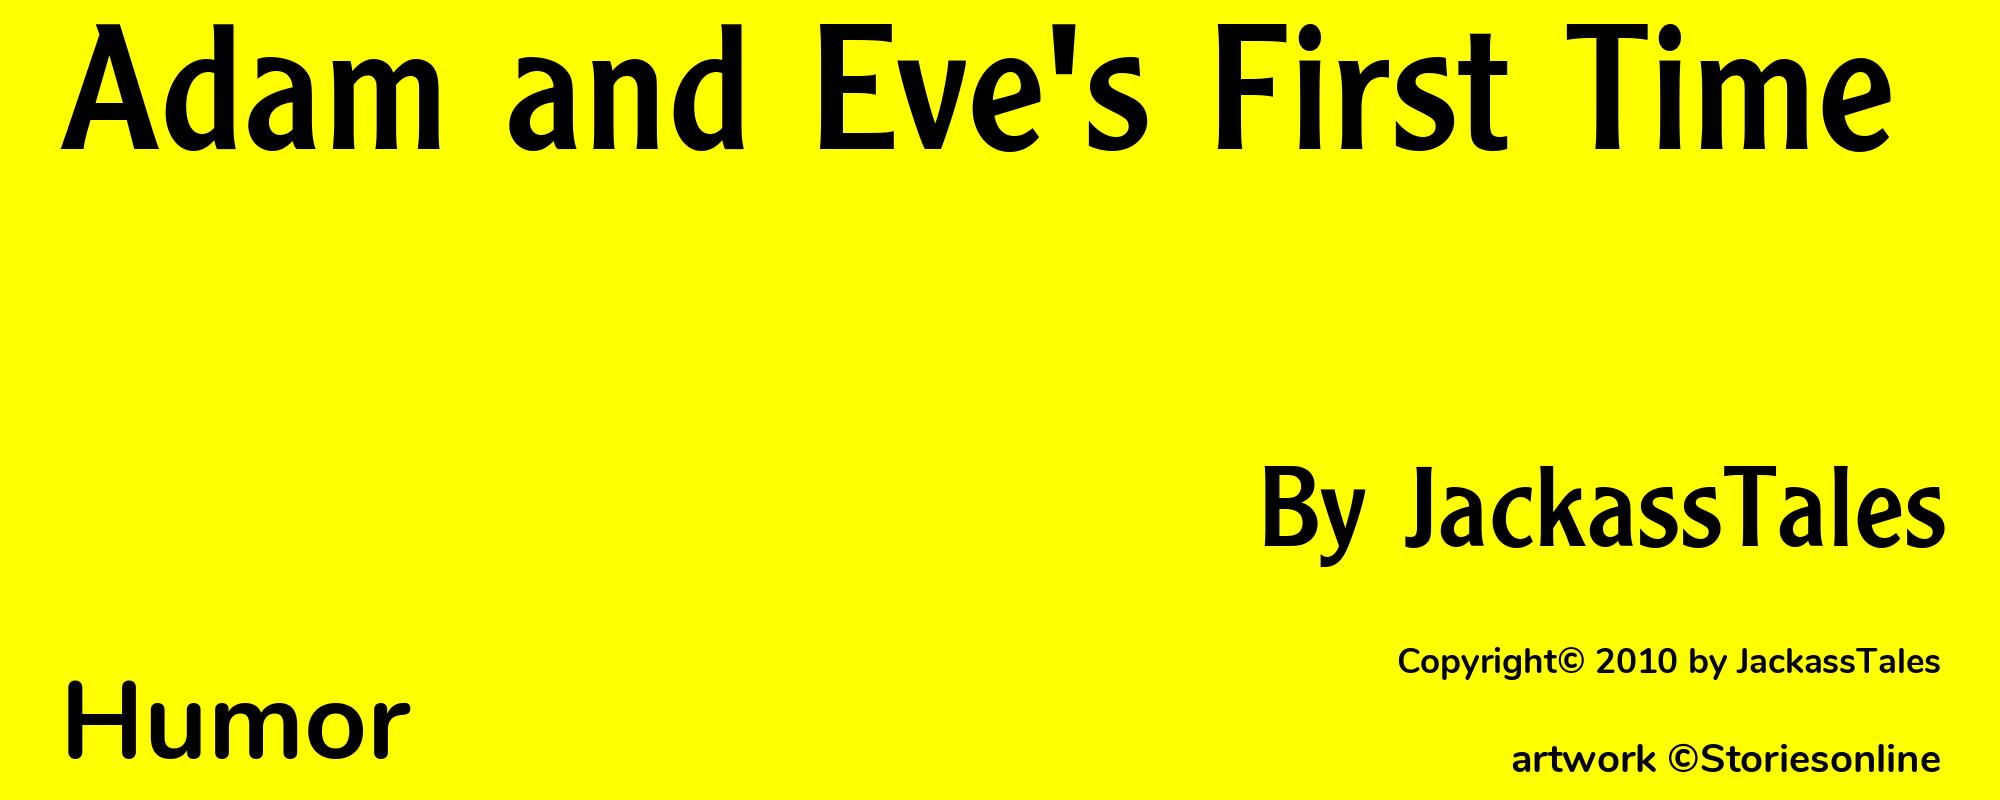 Adam and Eve's First Time - Cover